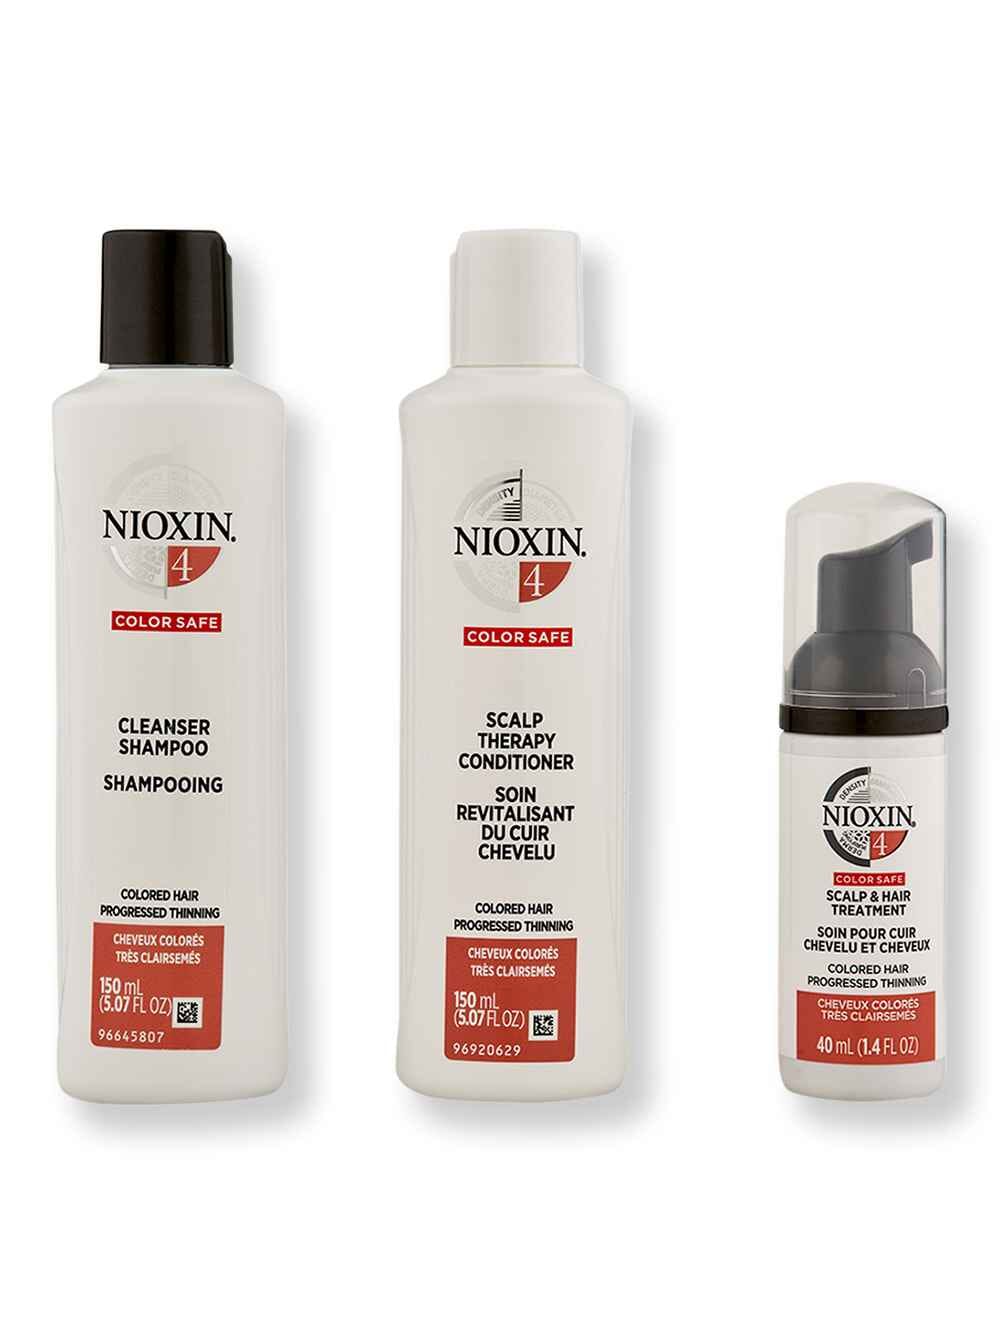 Nioxin Nioxin System 4: Colored Hair Progressed Thinning Hair Care Value Sets 